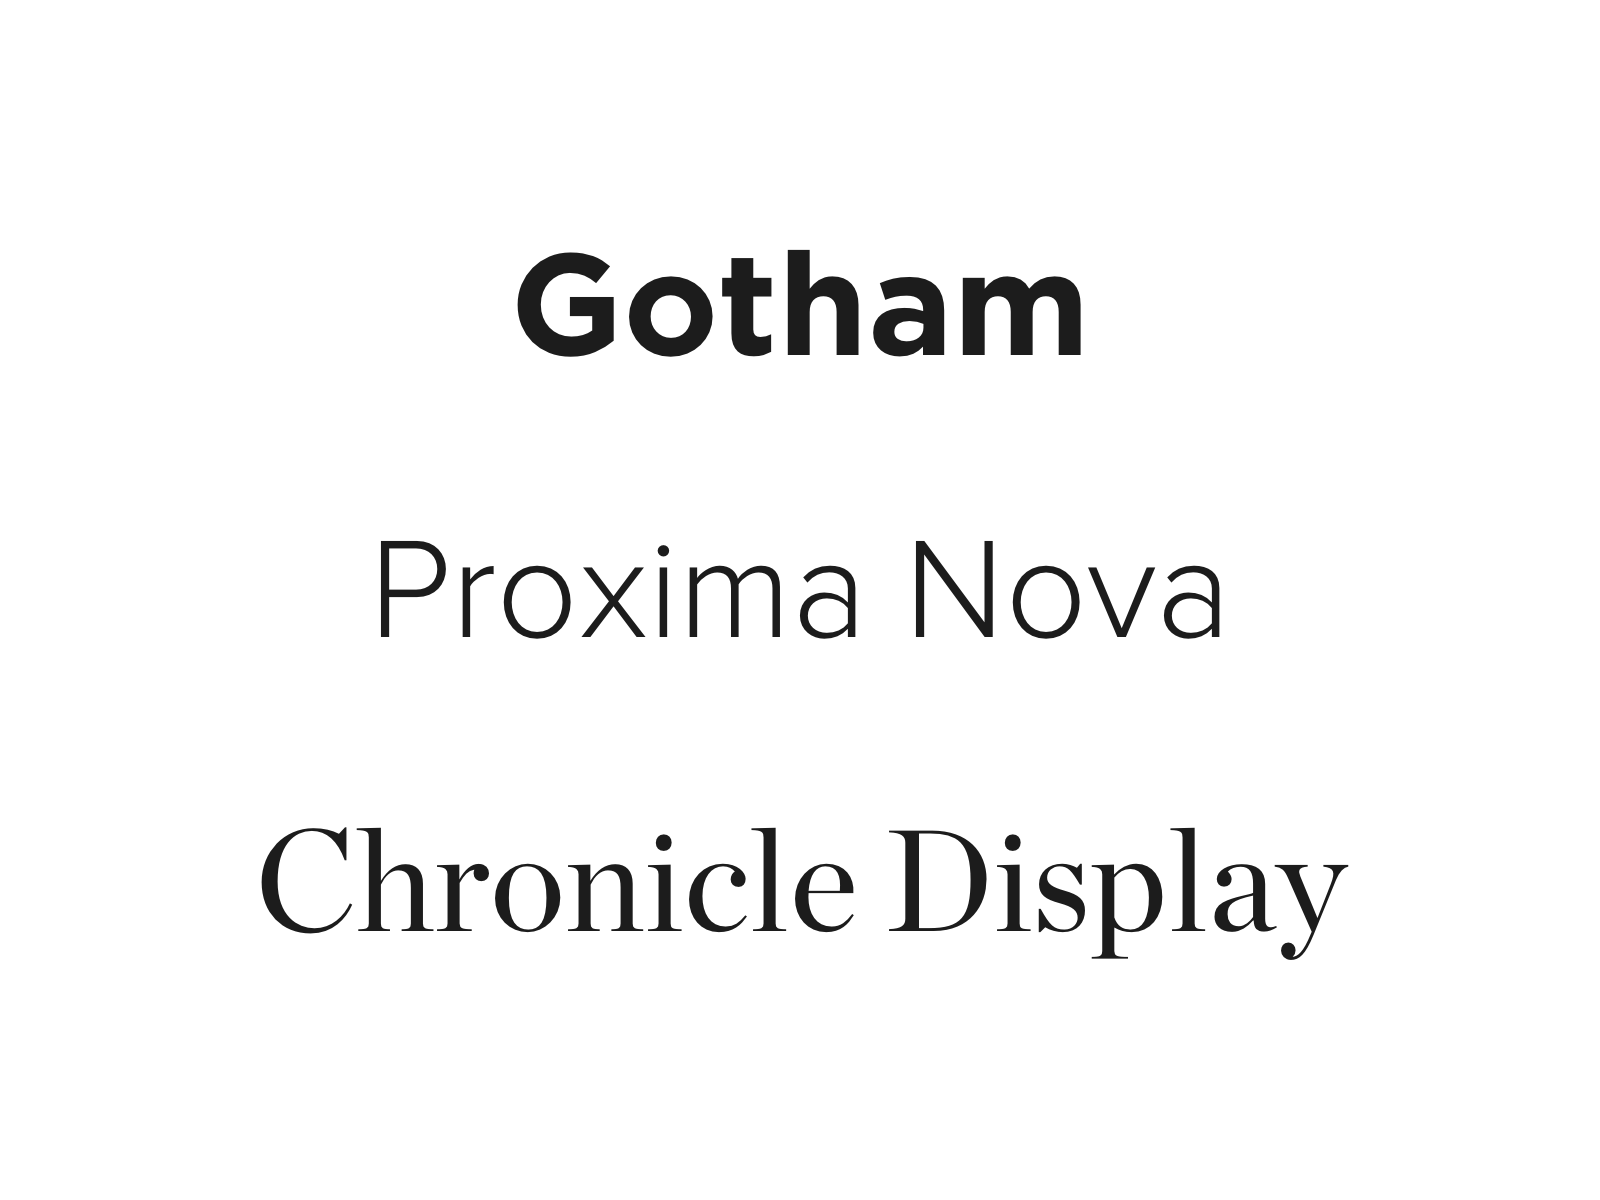 chronicle display font free